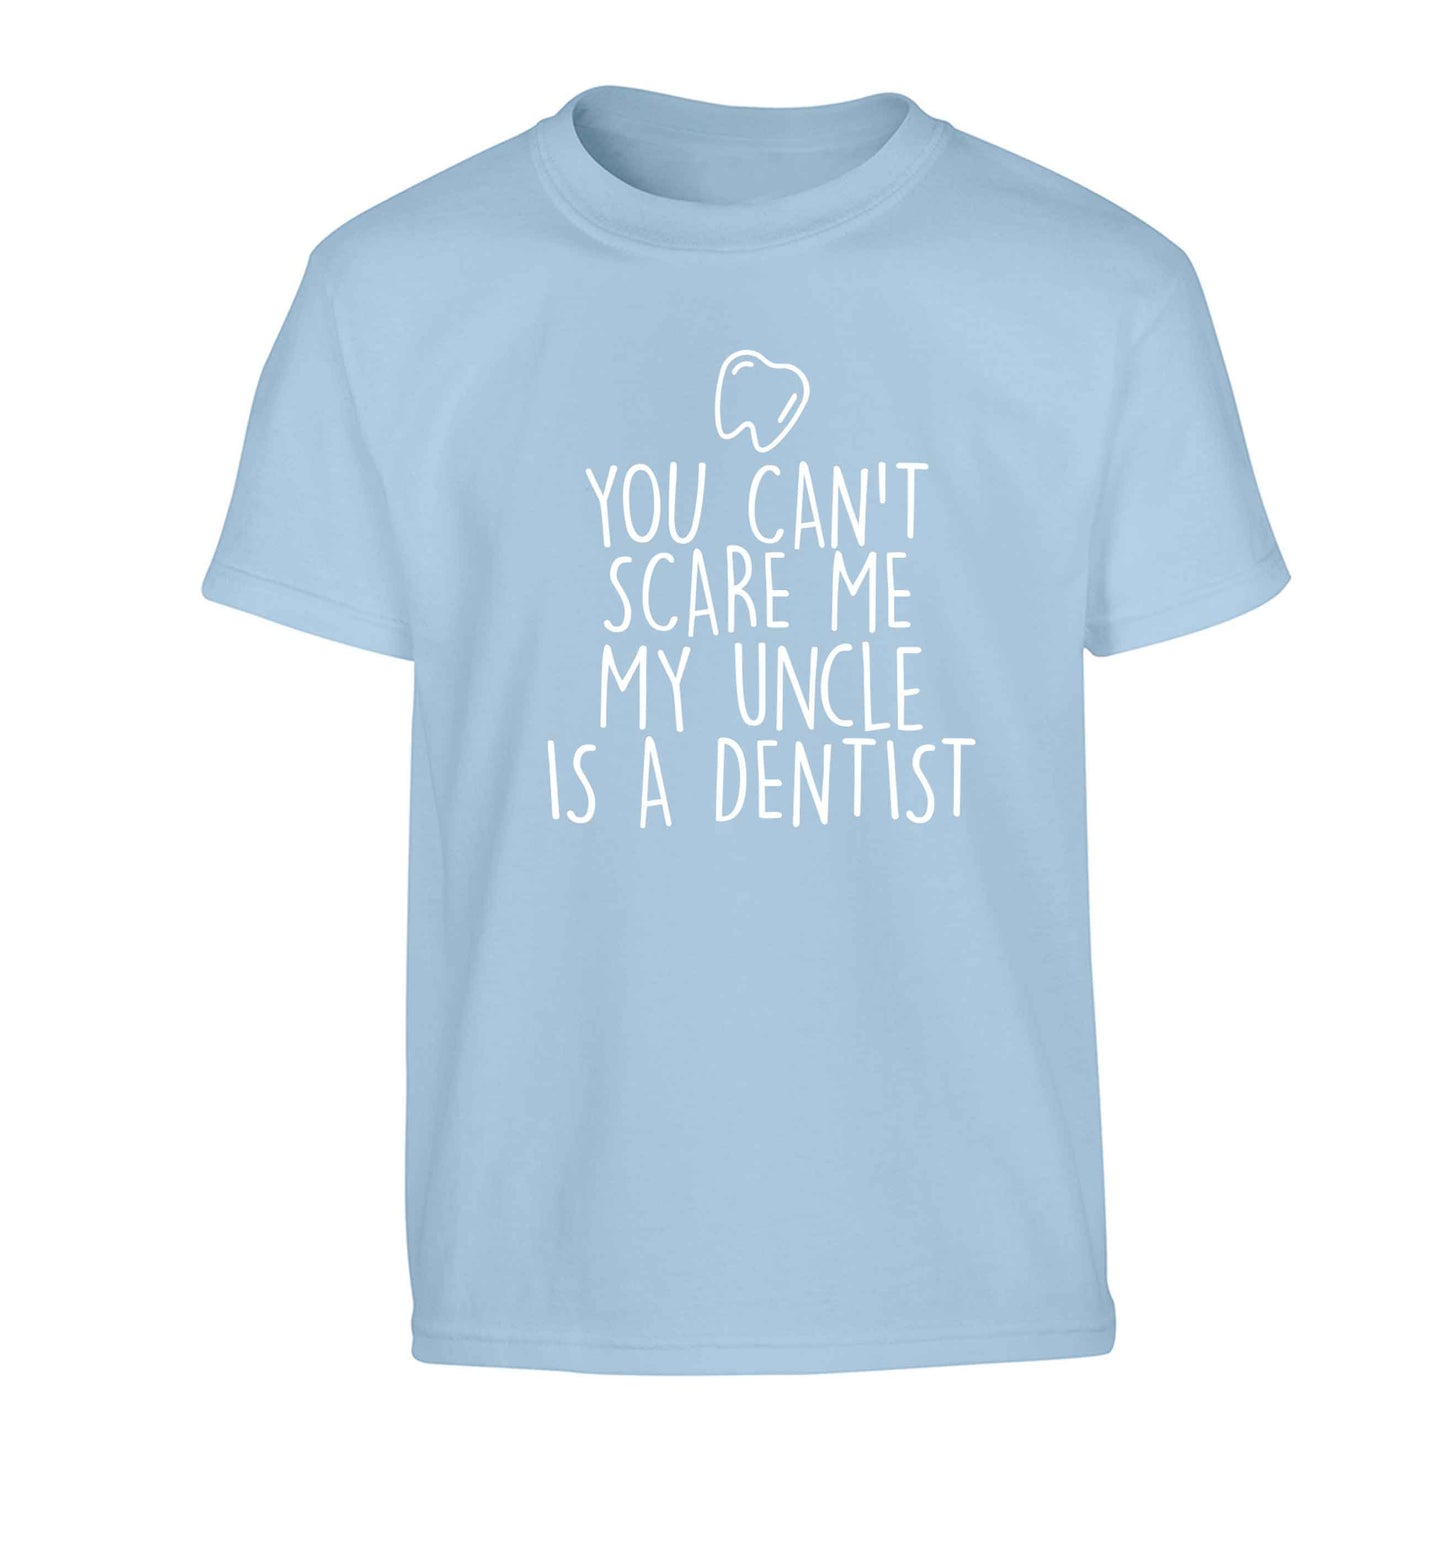 You can't scare me my uncle is a dentist Children's light blue Tshirt 12-13 Years